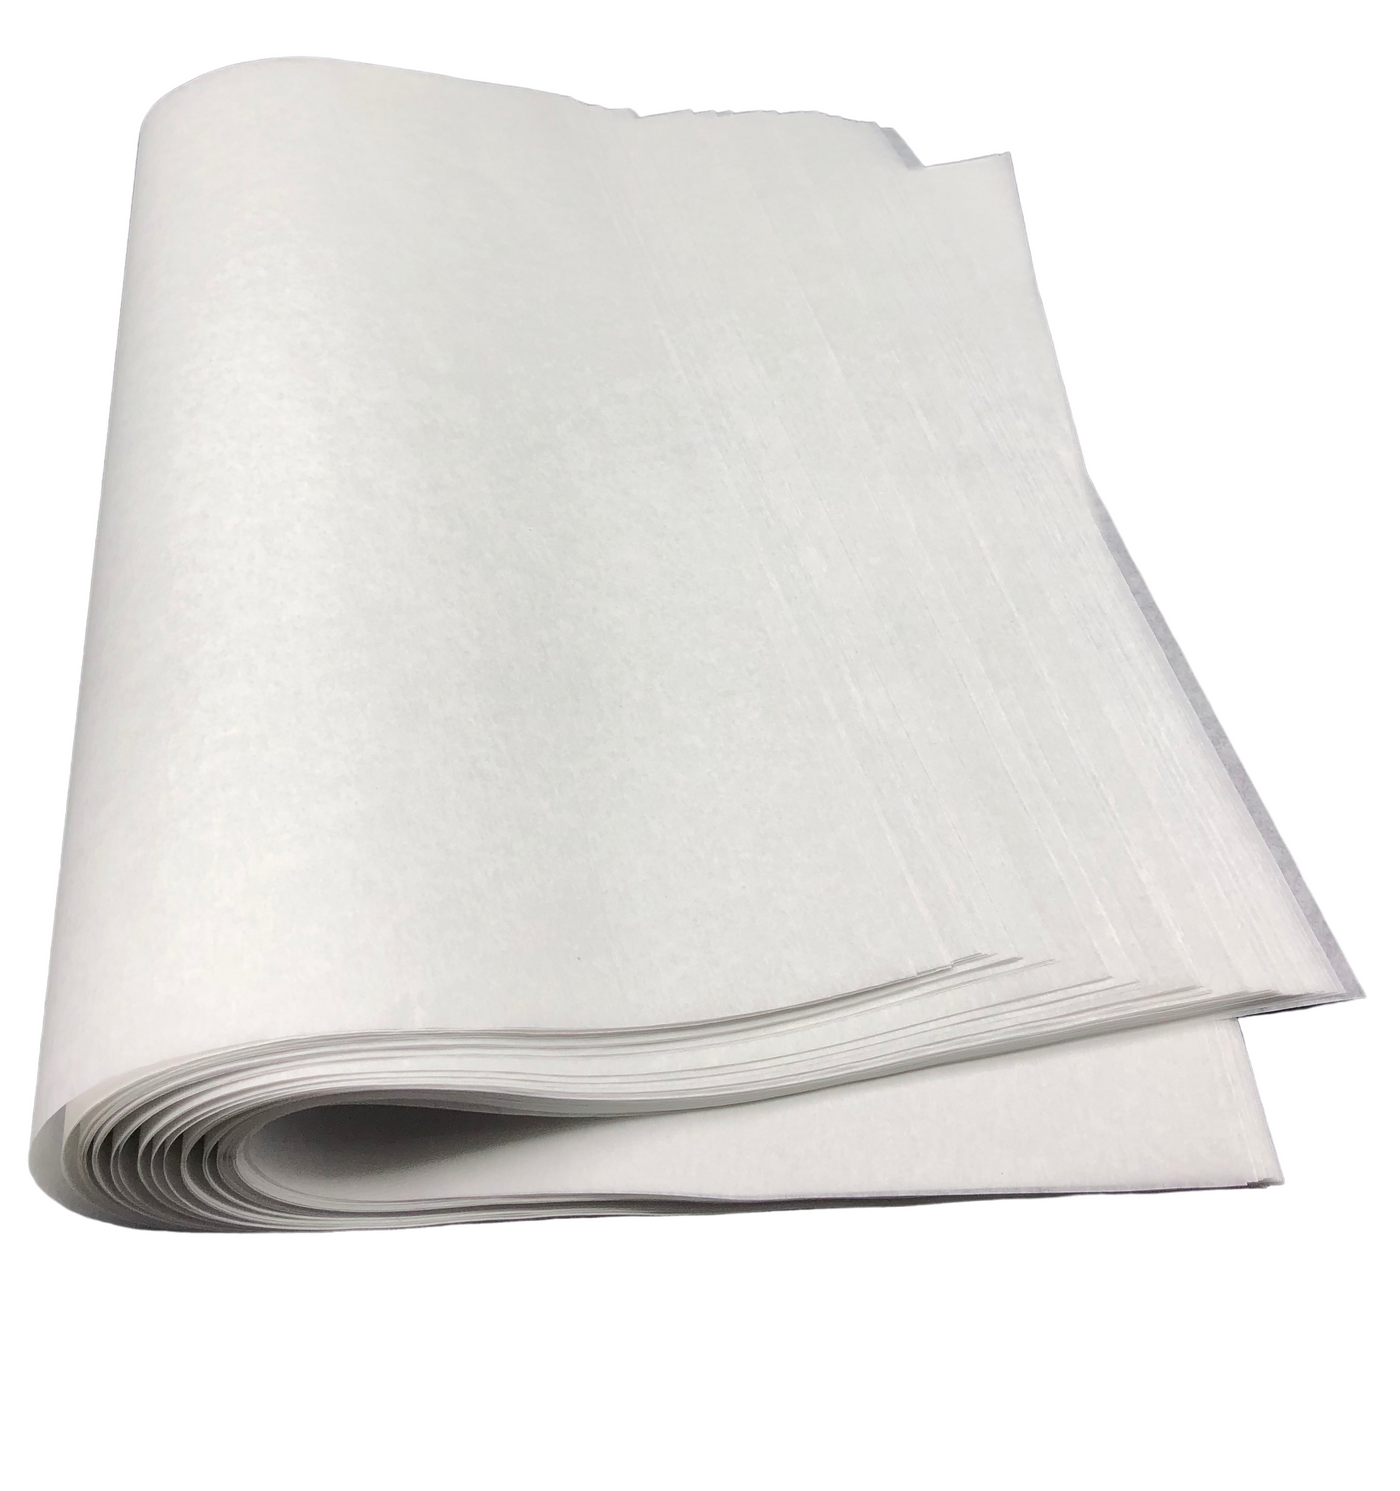 Parchment Paper Sheets for Baking: Oven Safe Parchment Paper, Parchment  Sheets, Bakery Quality Baking Paper for Perfect Results, High Temperature